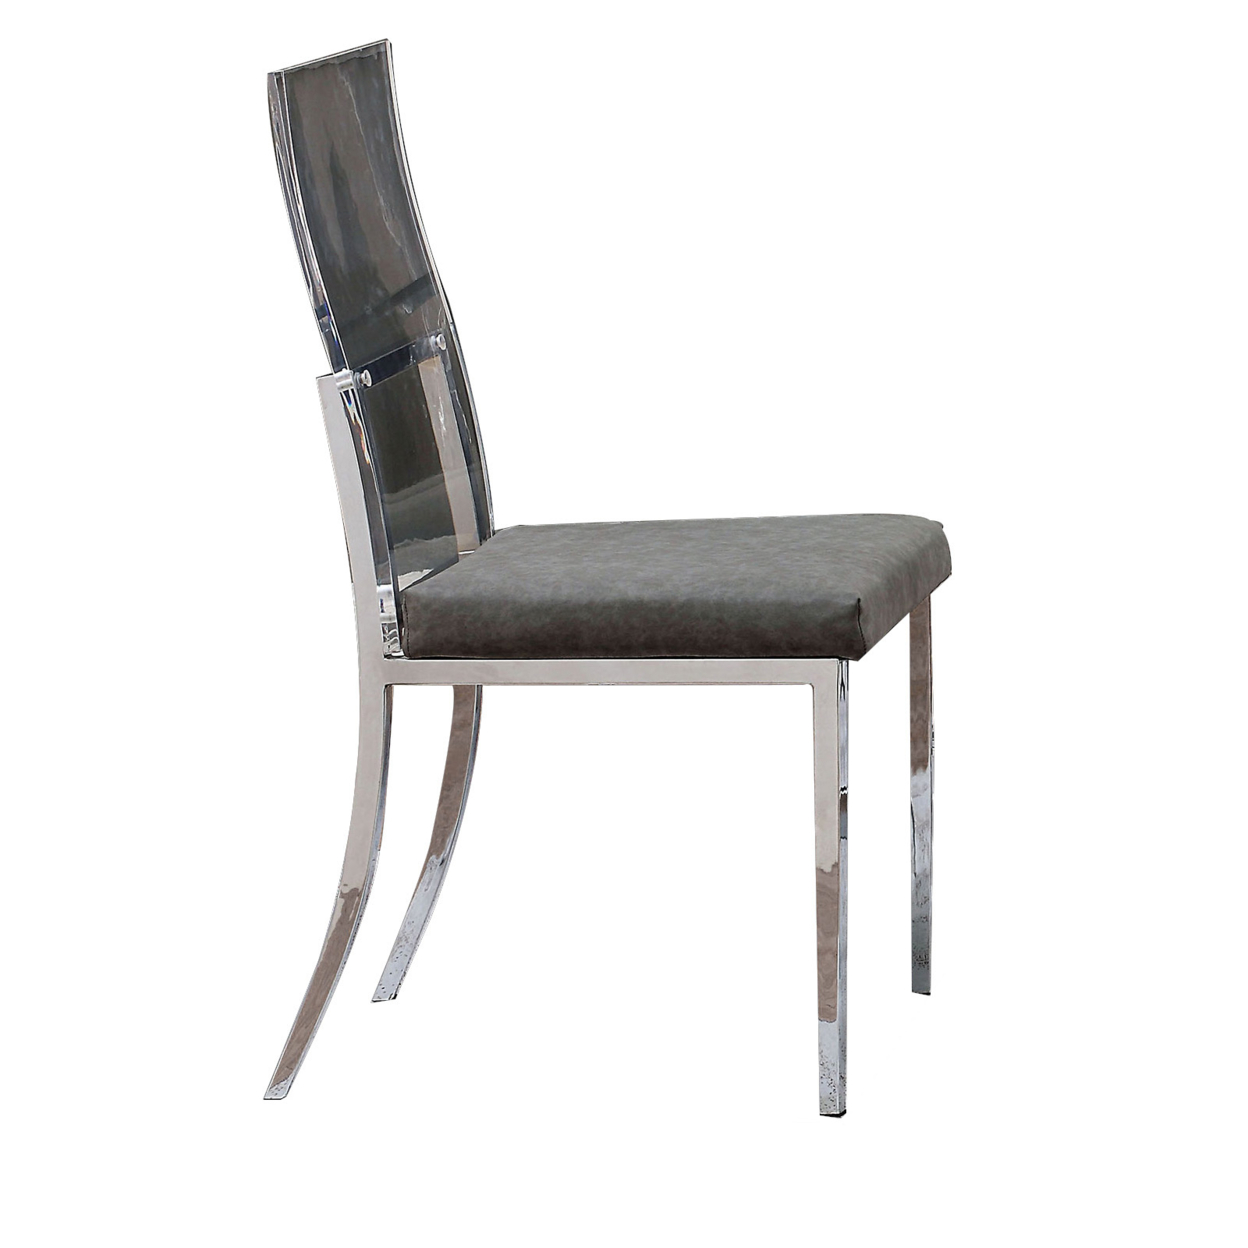 Metal Dining Side Chair With Acrylic Backing, Set Of 2,Gray And Silver- Saltoro Sherpi